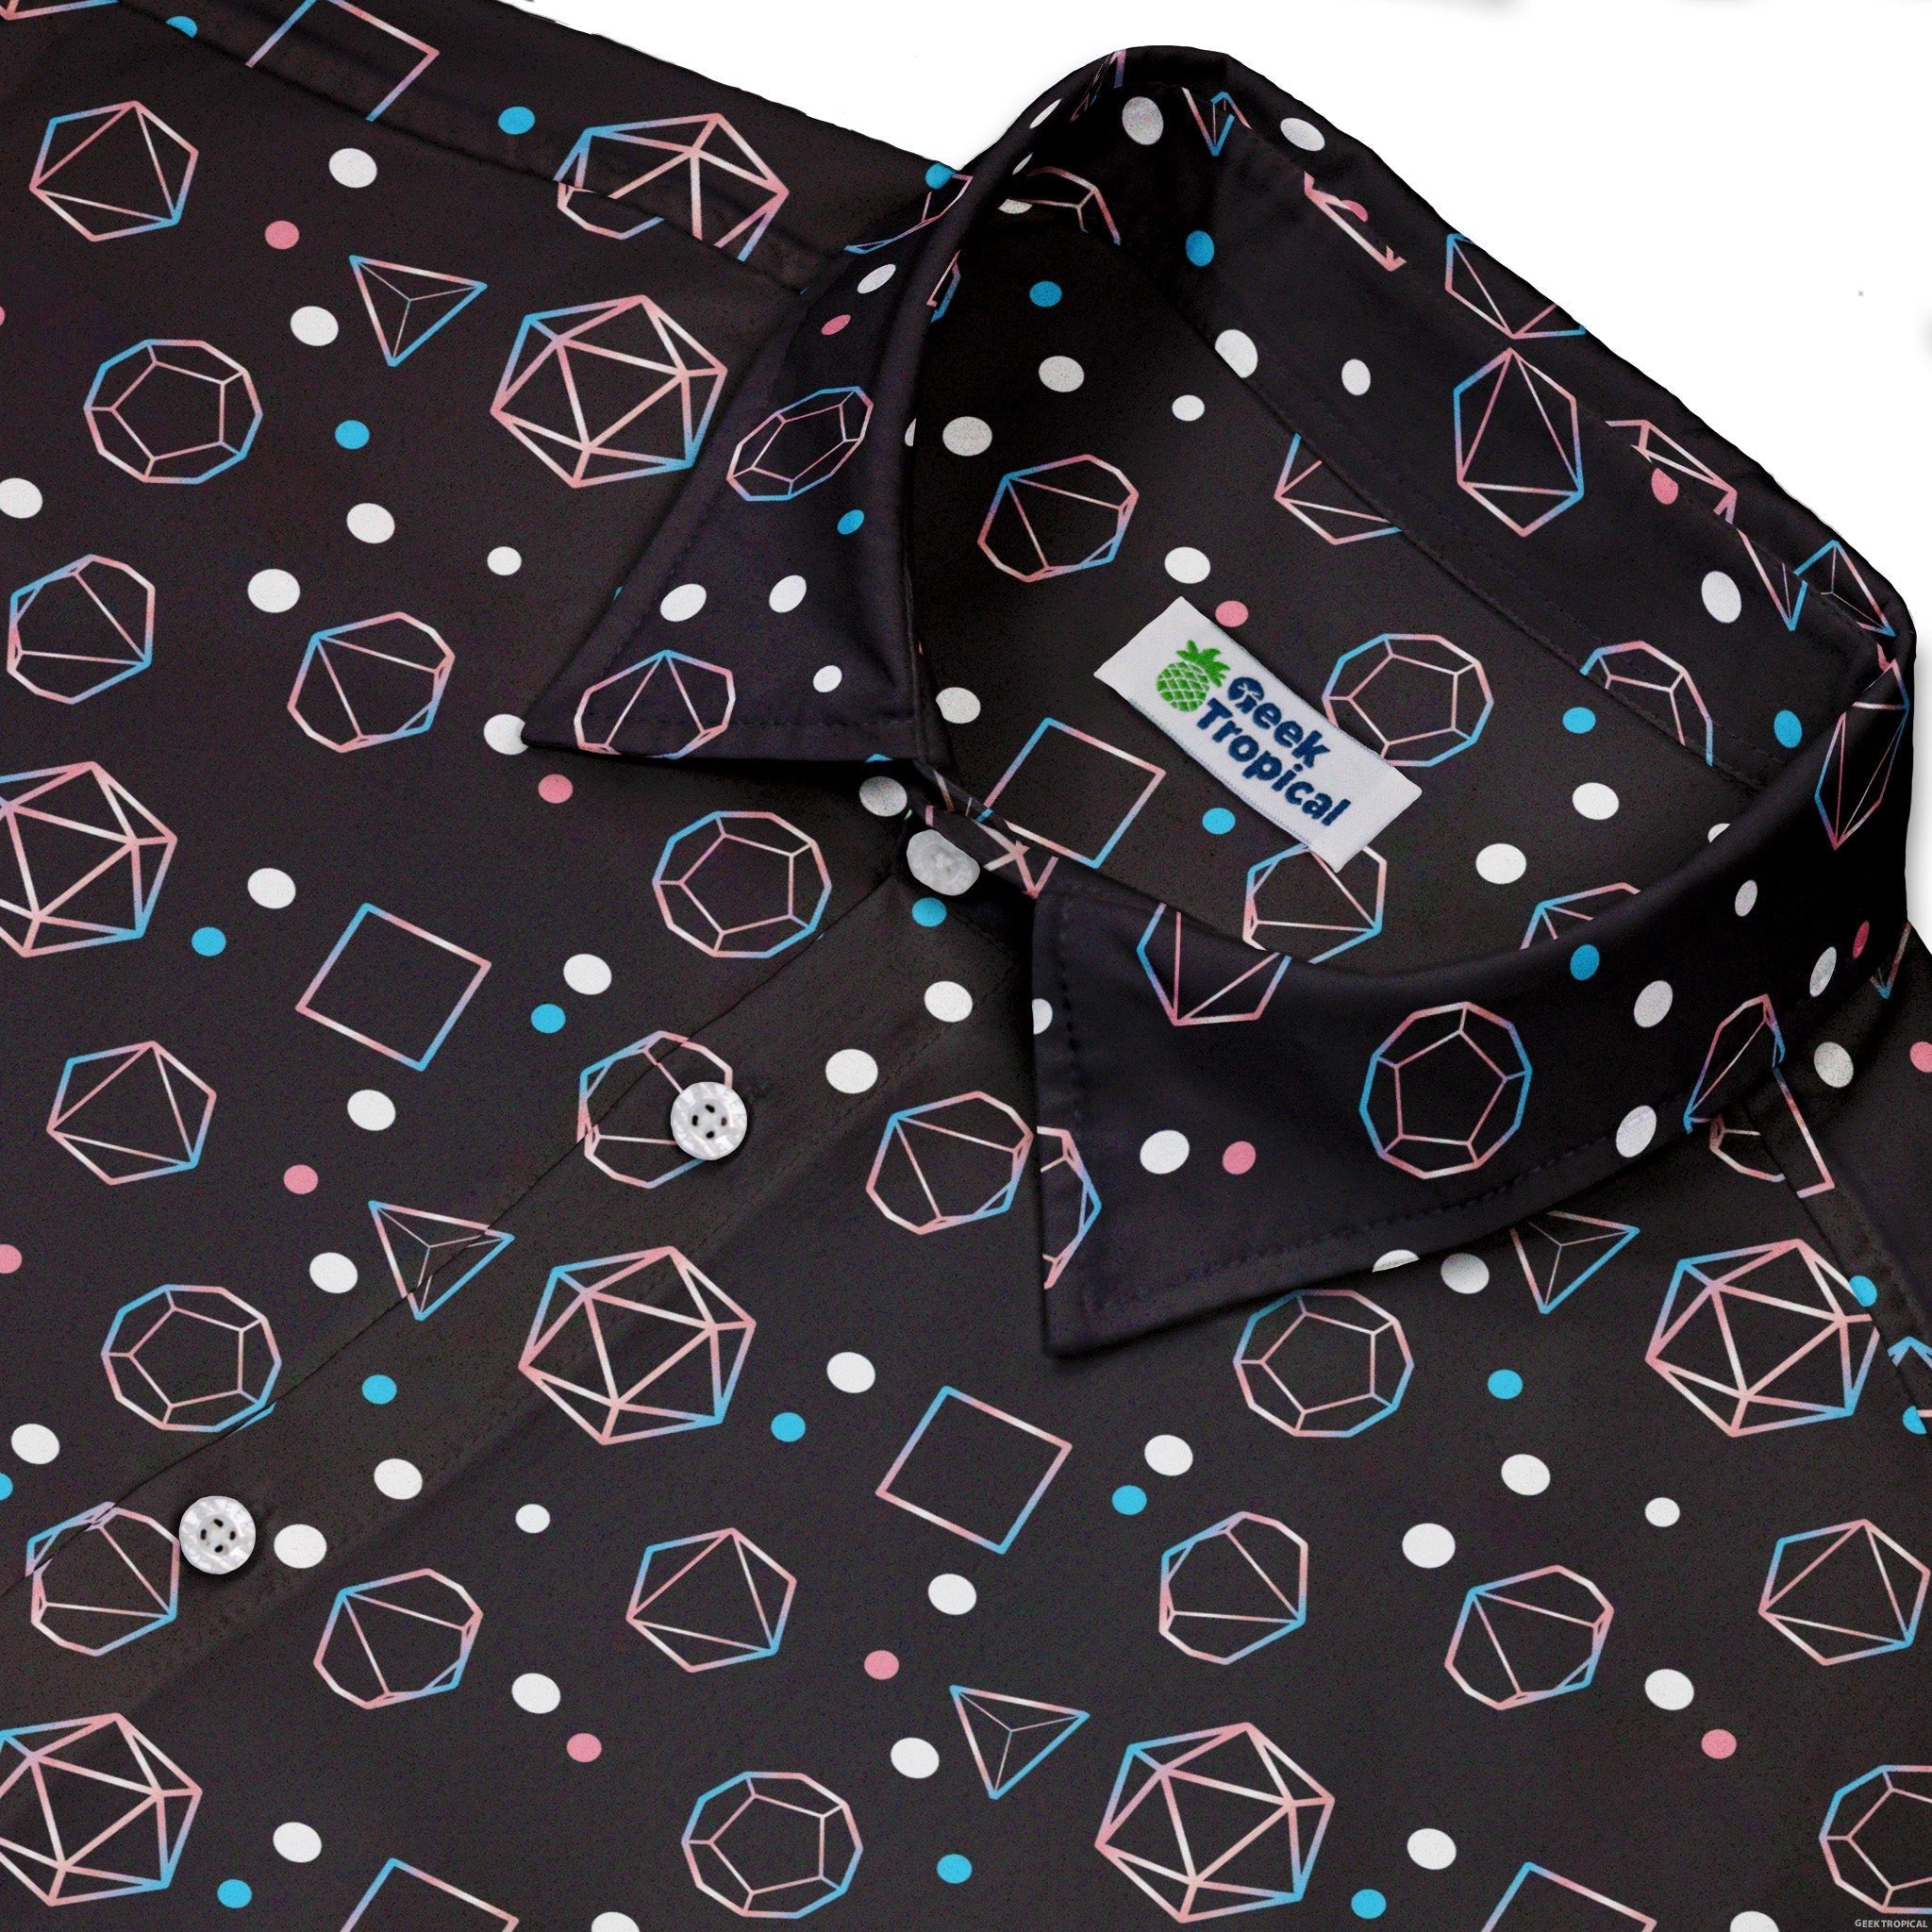 Trans Pride Flag DND Dice Button Up Shirt - adult sizing - Design by Heather Davenport - dnd & rpg print